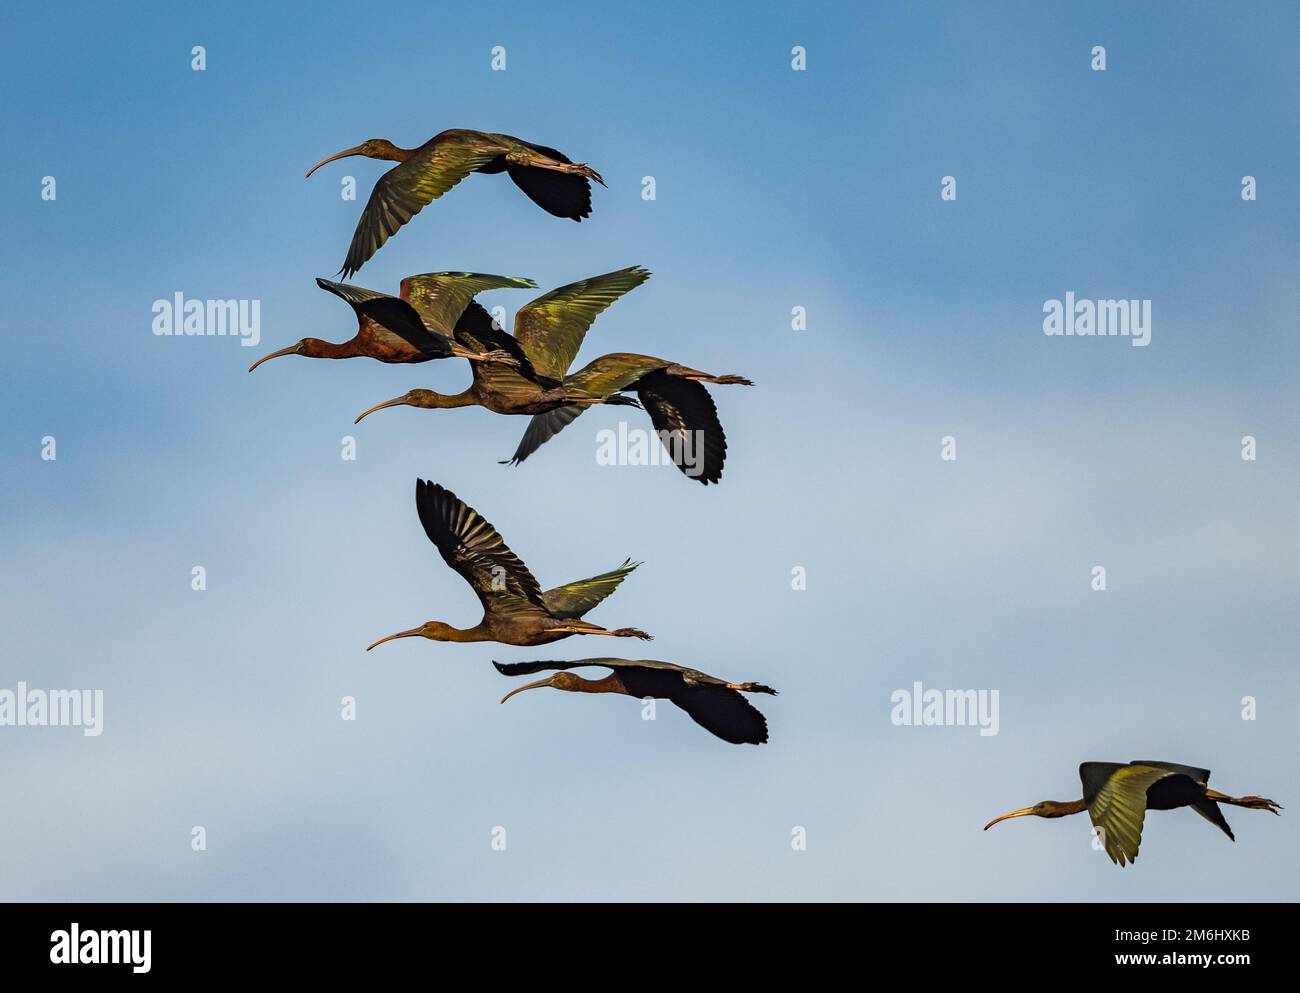 A flock of Glossy Ibis (Plegadis falcinellus) flying over blue sky. Western Cape, South Africa. Stock Photo